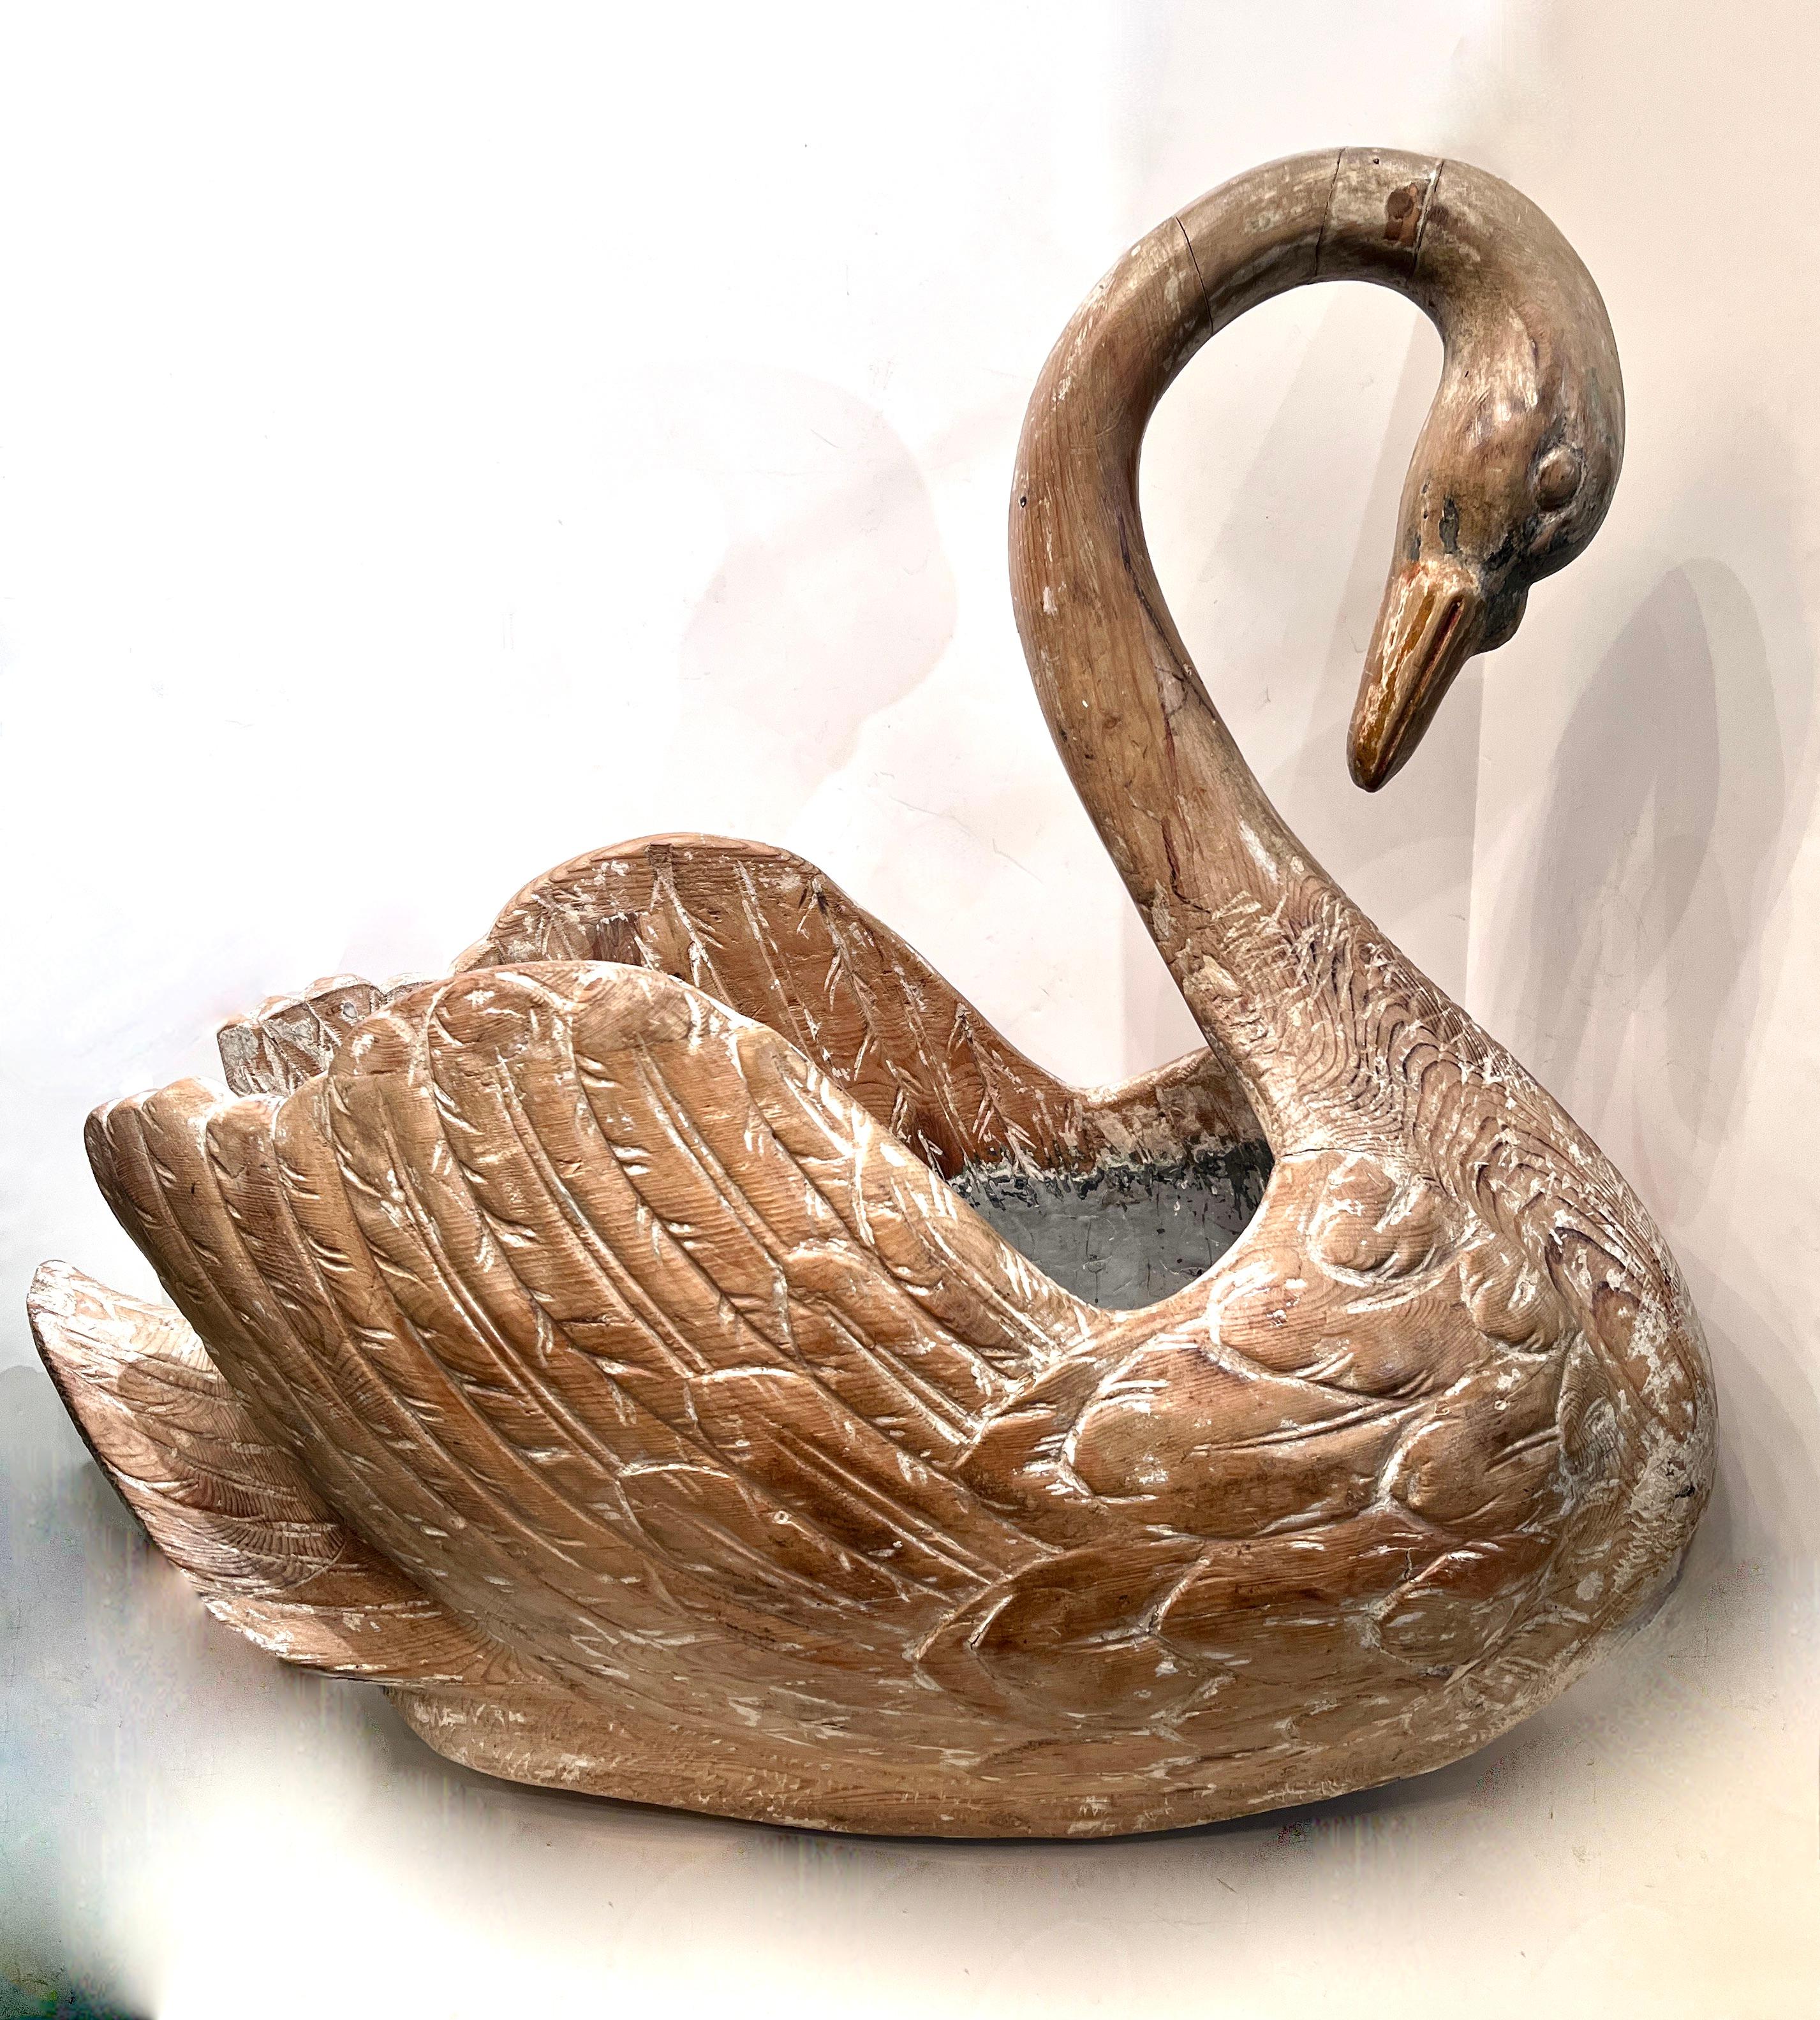 A beautifully hand carved Swan - the aged wood has a wonderful patination and the carving is exquisite.  This would make a great stand alone centerpiece or even a lovely addition to a large console or on the floor.  The inside is free and with a